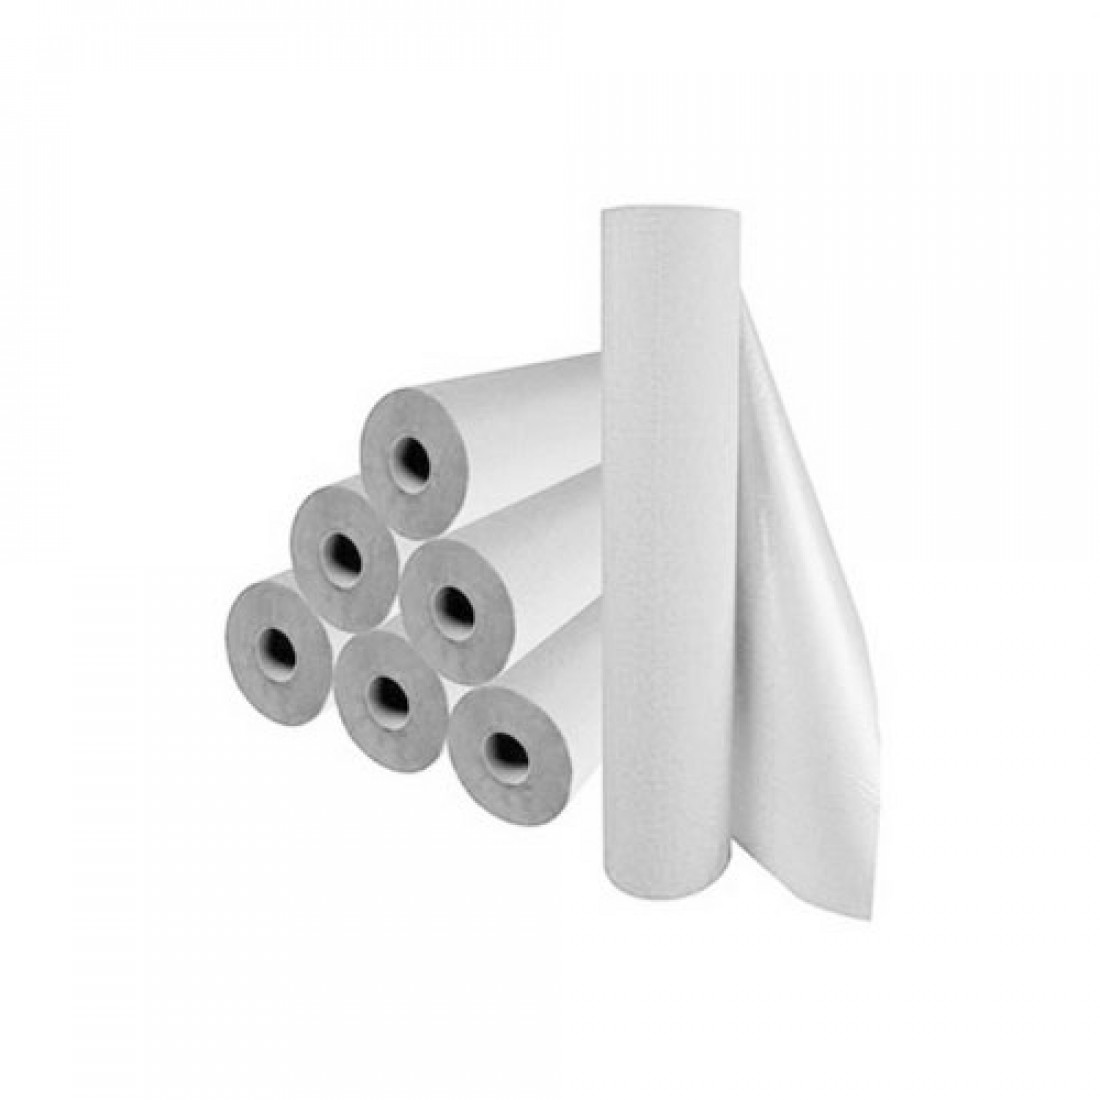 Bed roll paper 68x50cm-3710136 SINGLE USE PRODUCTS